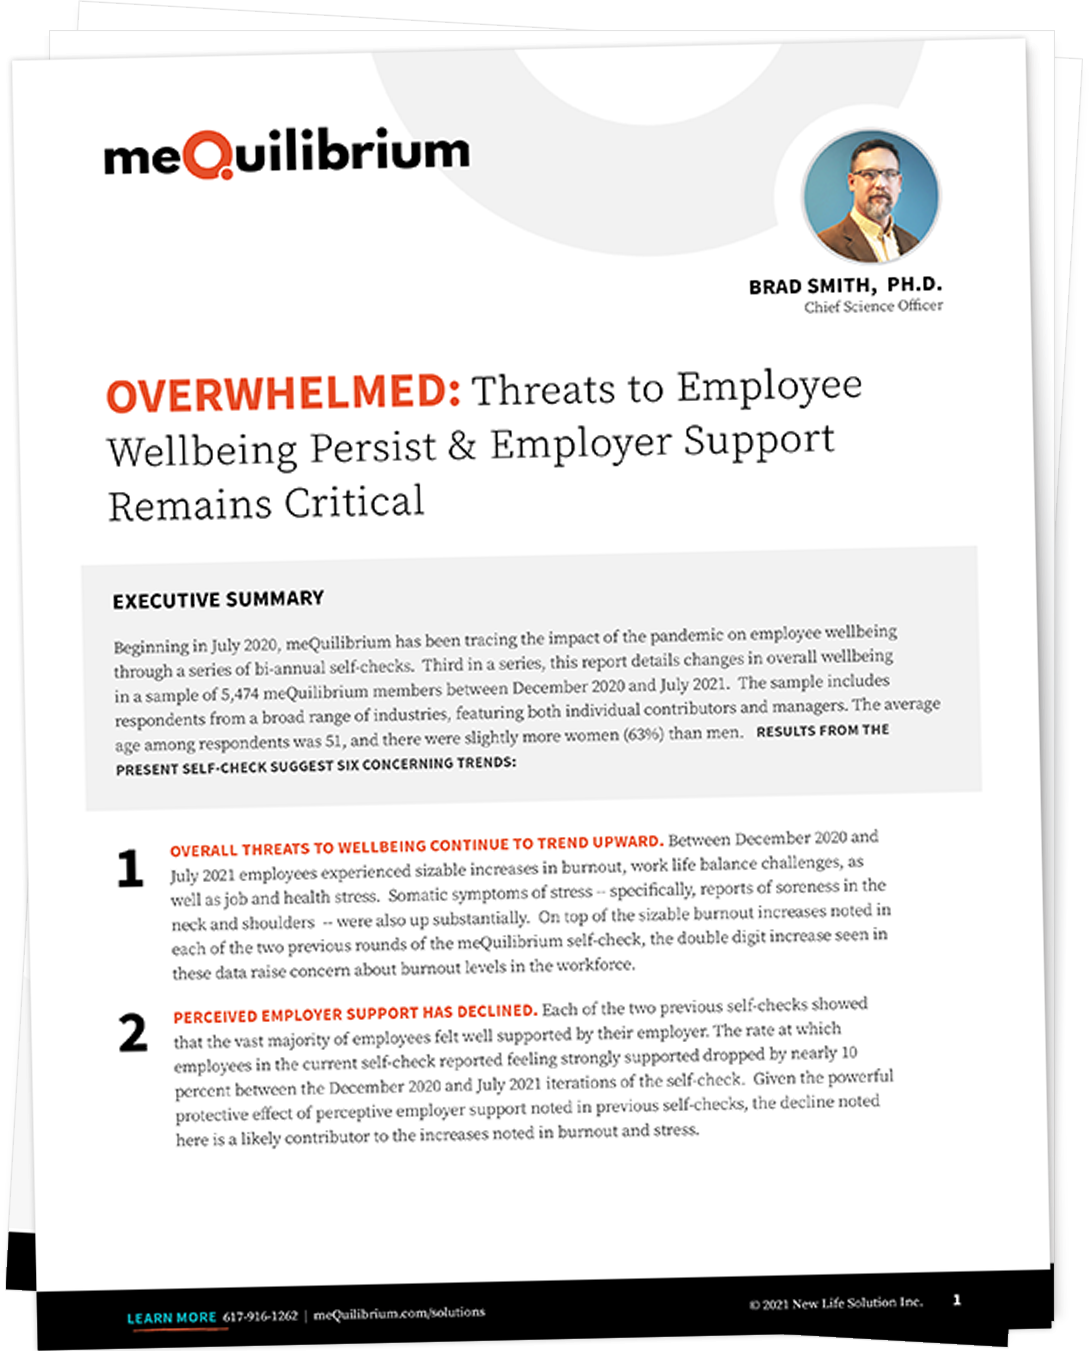 Threats to Employee Wellbeing Persist & Employer Support Remains Critical